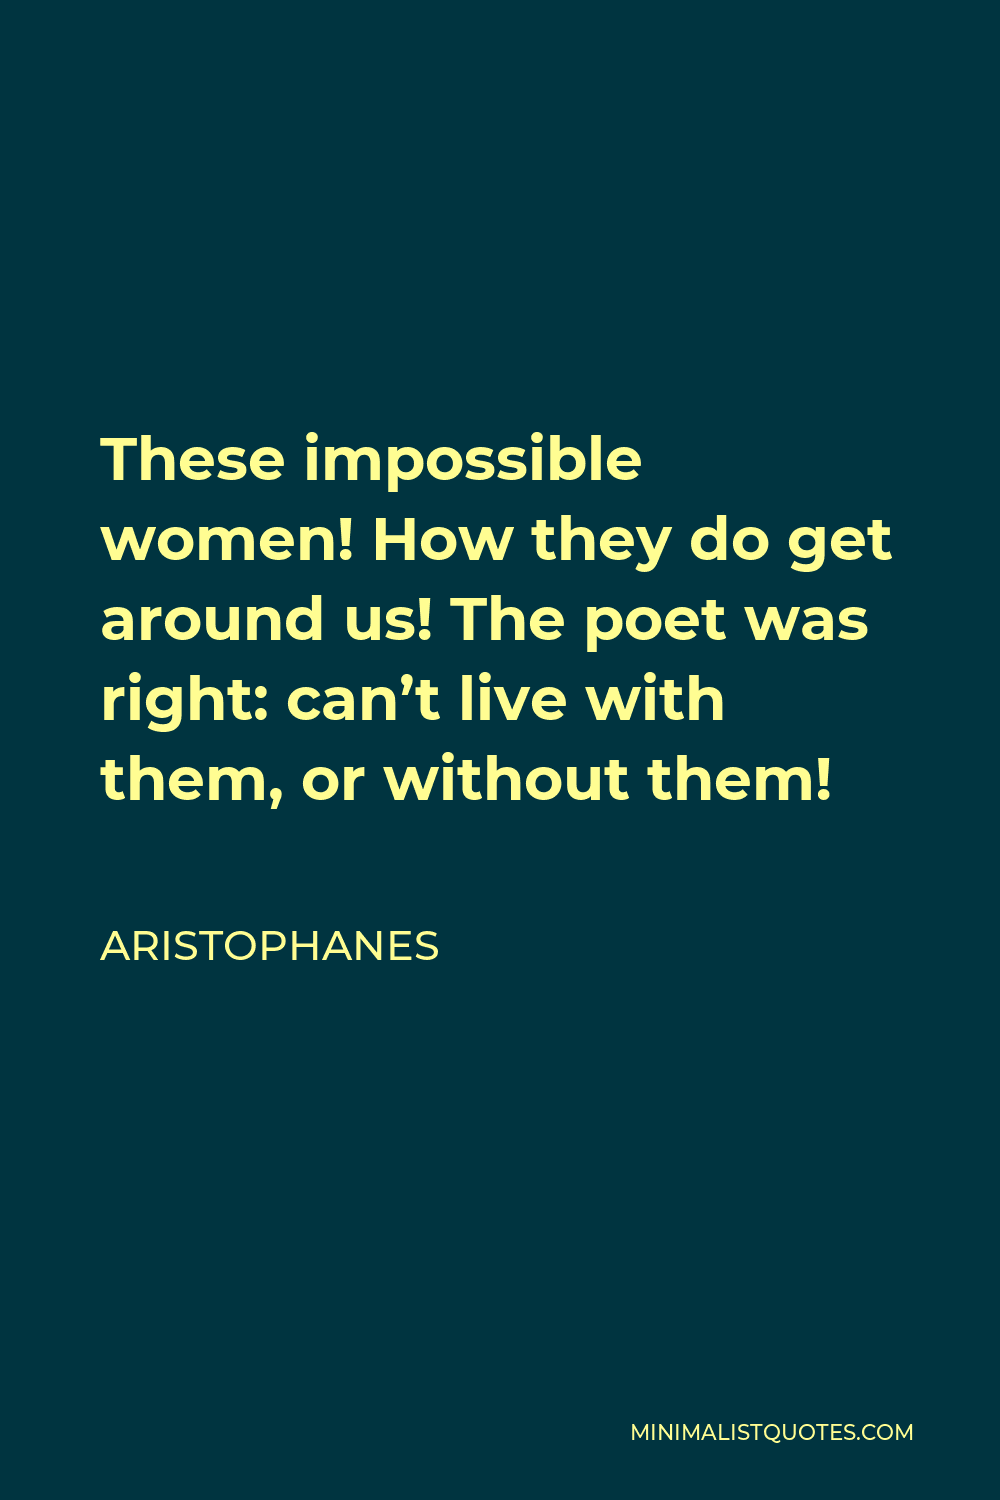 Aristophanes Quote - These impossible women! How they do get around us! The poet was right: can’t live with them, or without them!